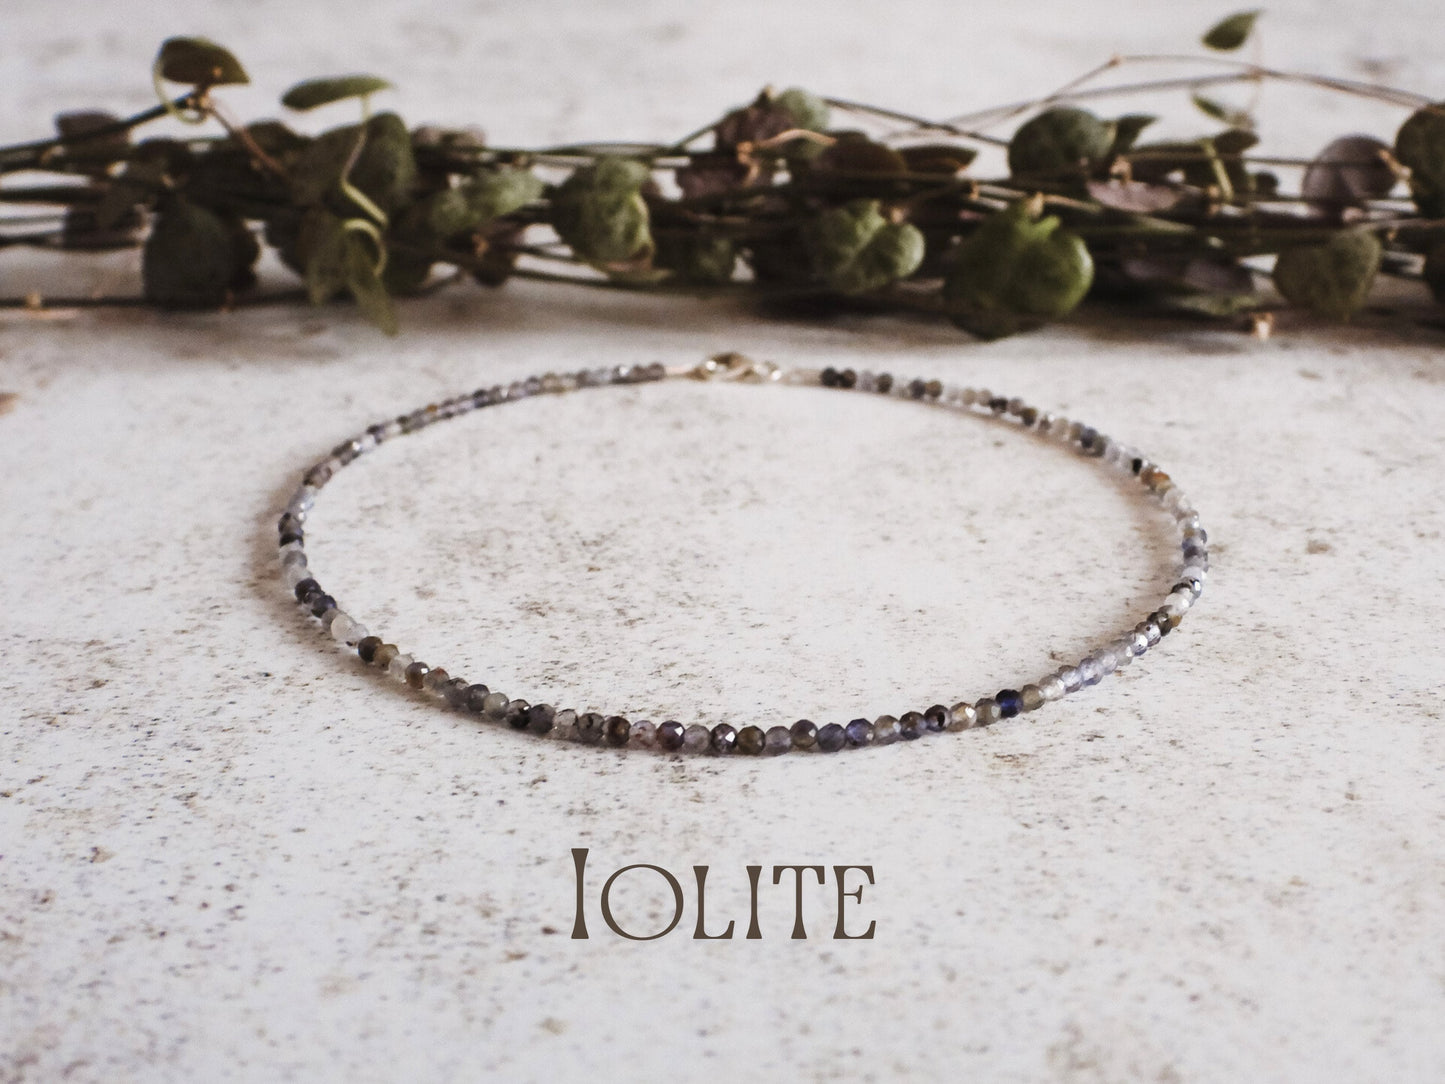 Dainty Iolite "Worry" Gemstone Anklet | The Viking Compass